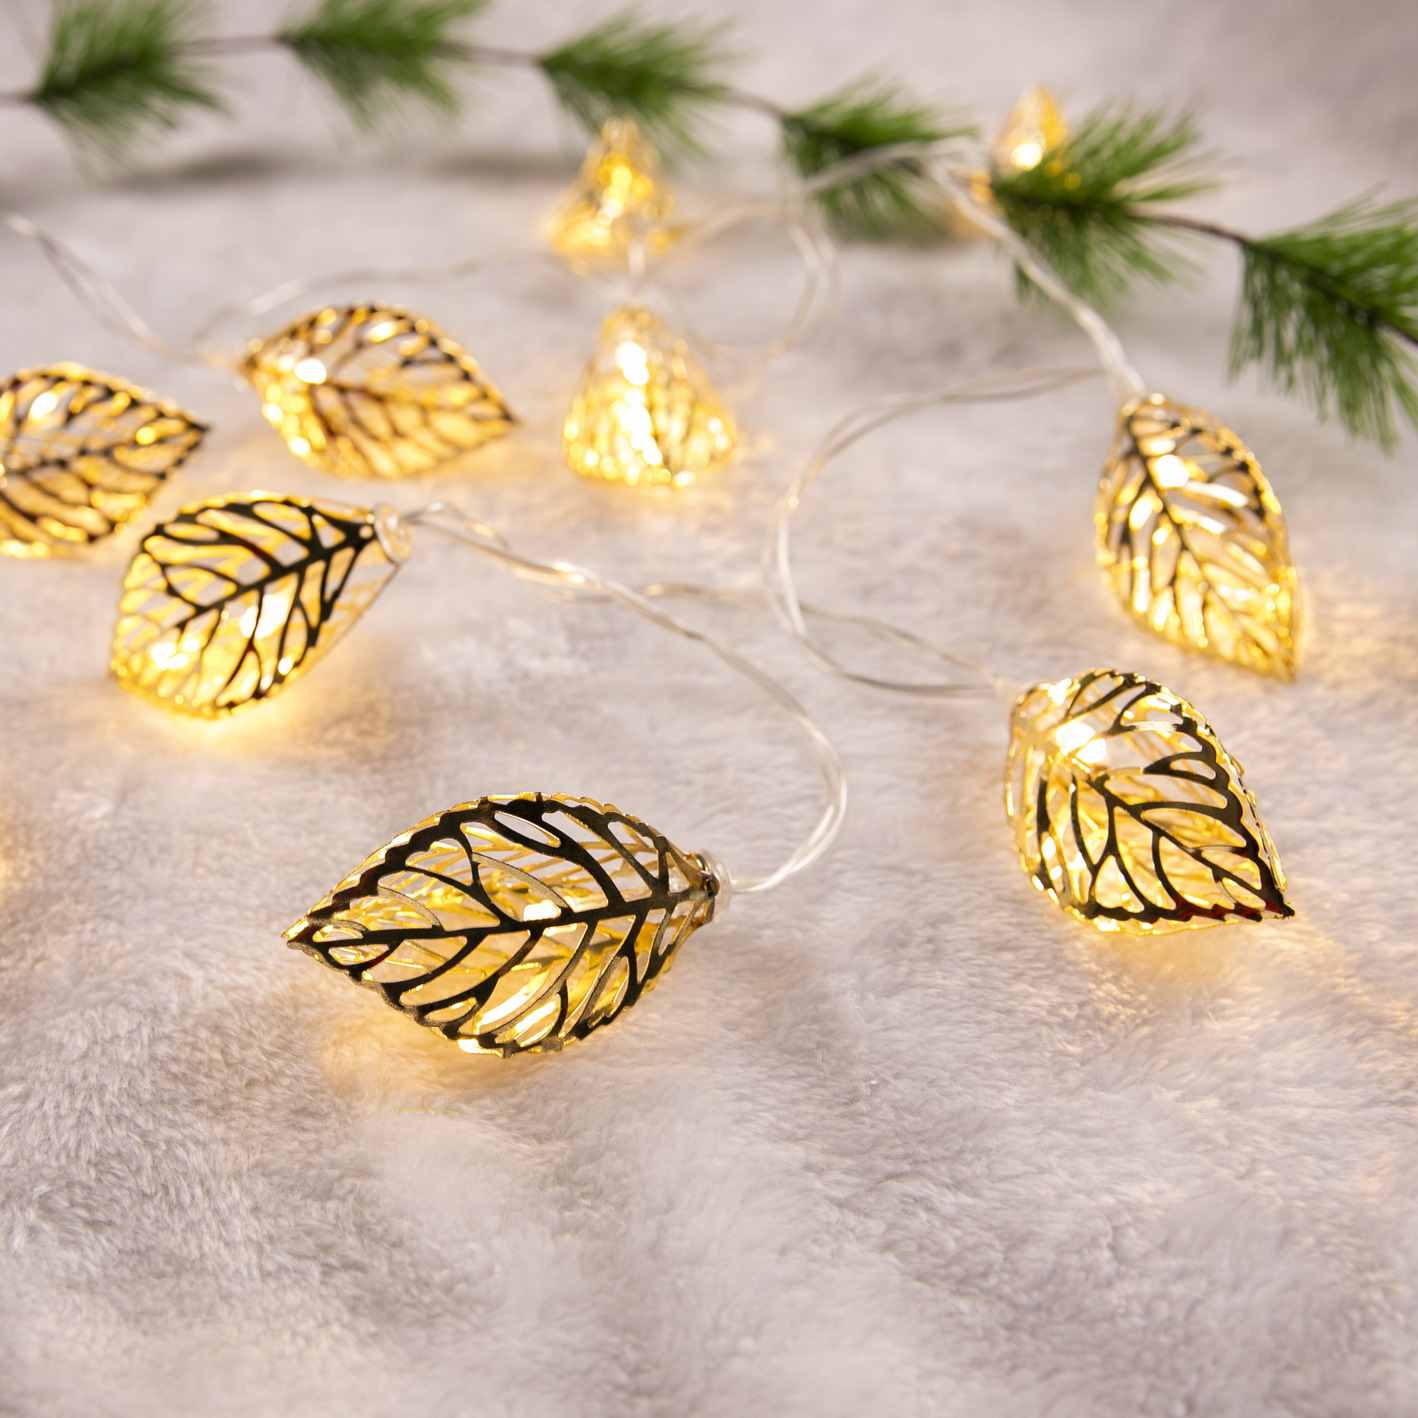 Short Lead Time for Mason Jar Fairy Lights -
 China Customized Metal Golden Leaf Christmas Fairy String Light For Holiday Decoration | ZHONGXIN – Zhongxin